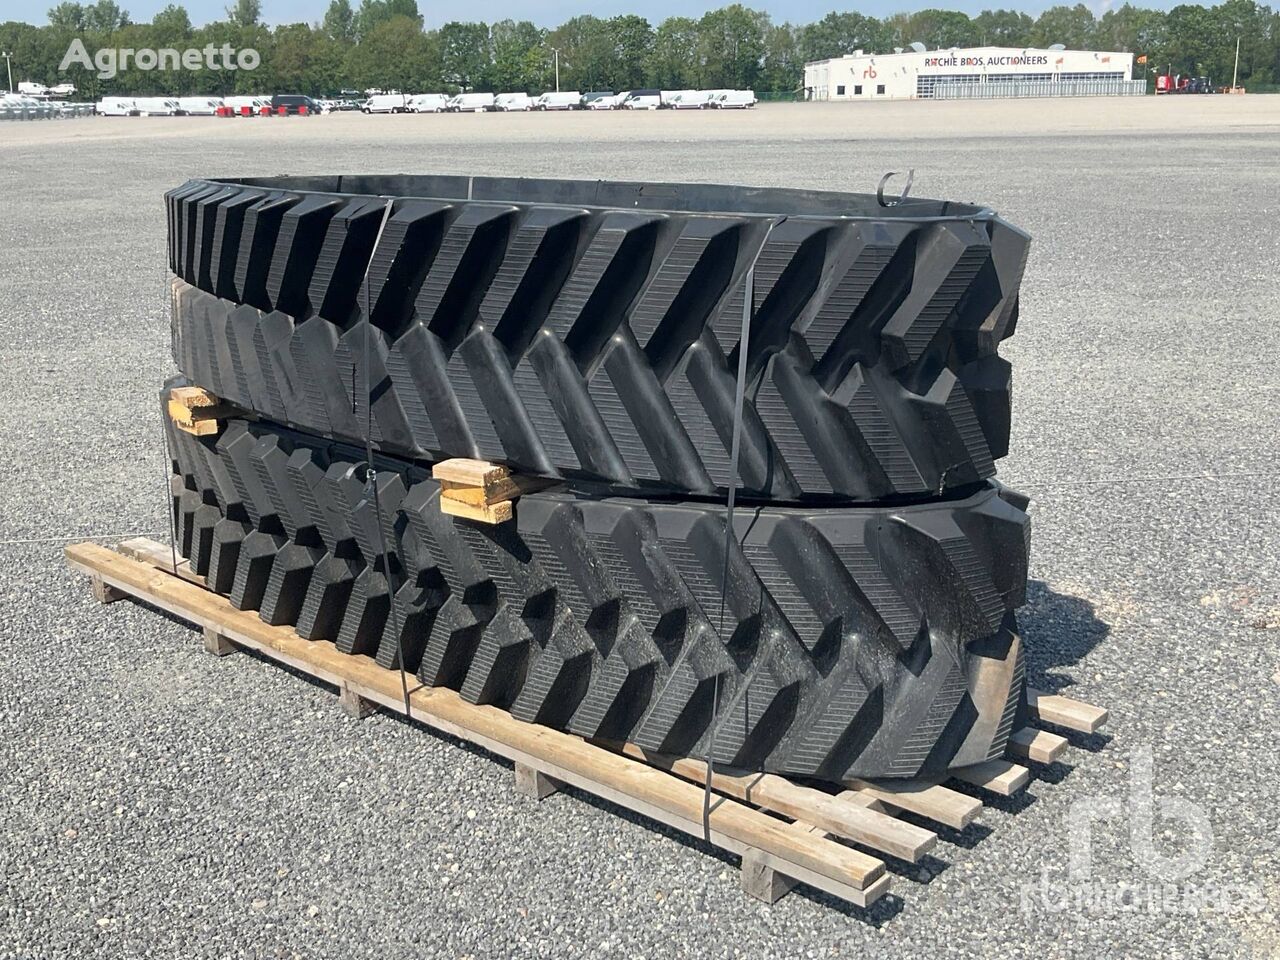 Quantity of (2) 635x178x38 (Unused) rubber track for Claas  Lexion grain harvester